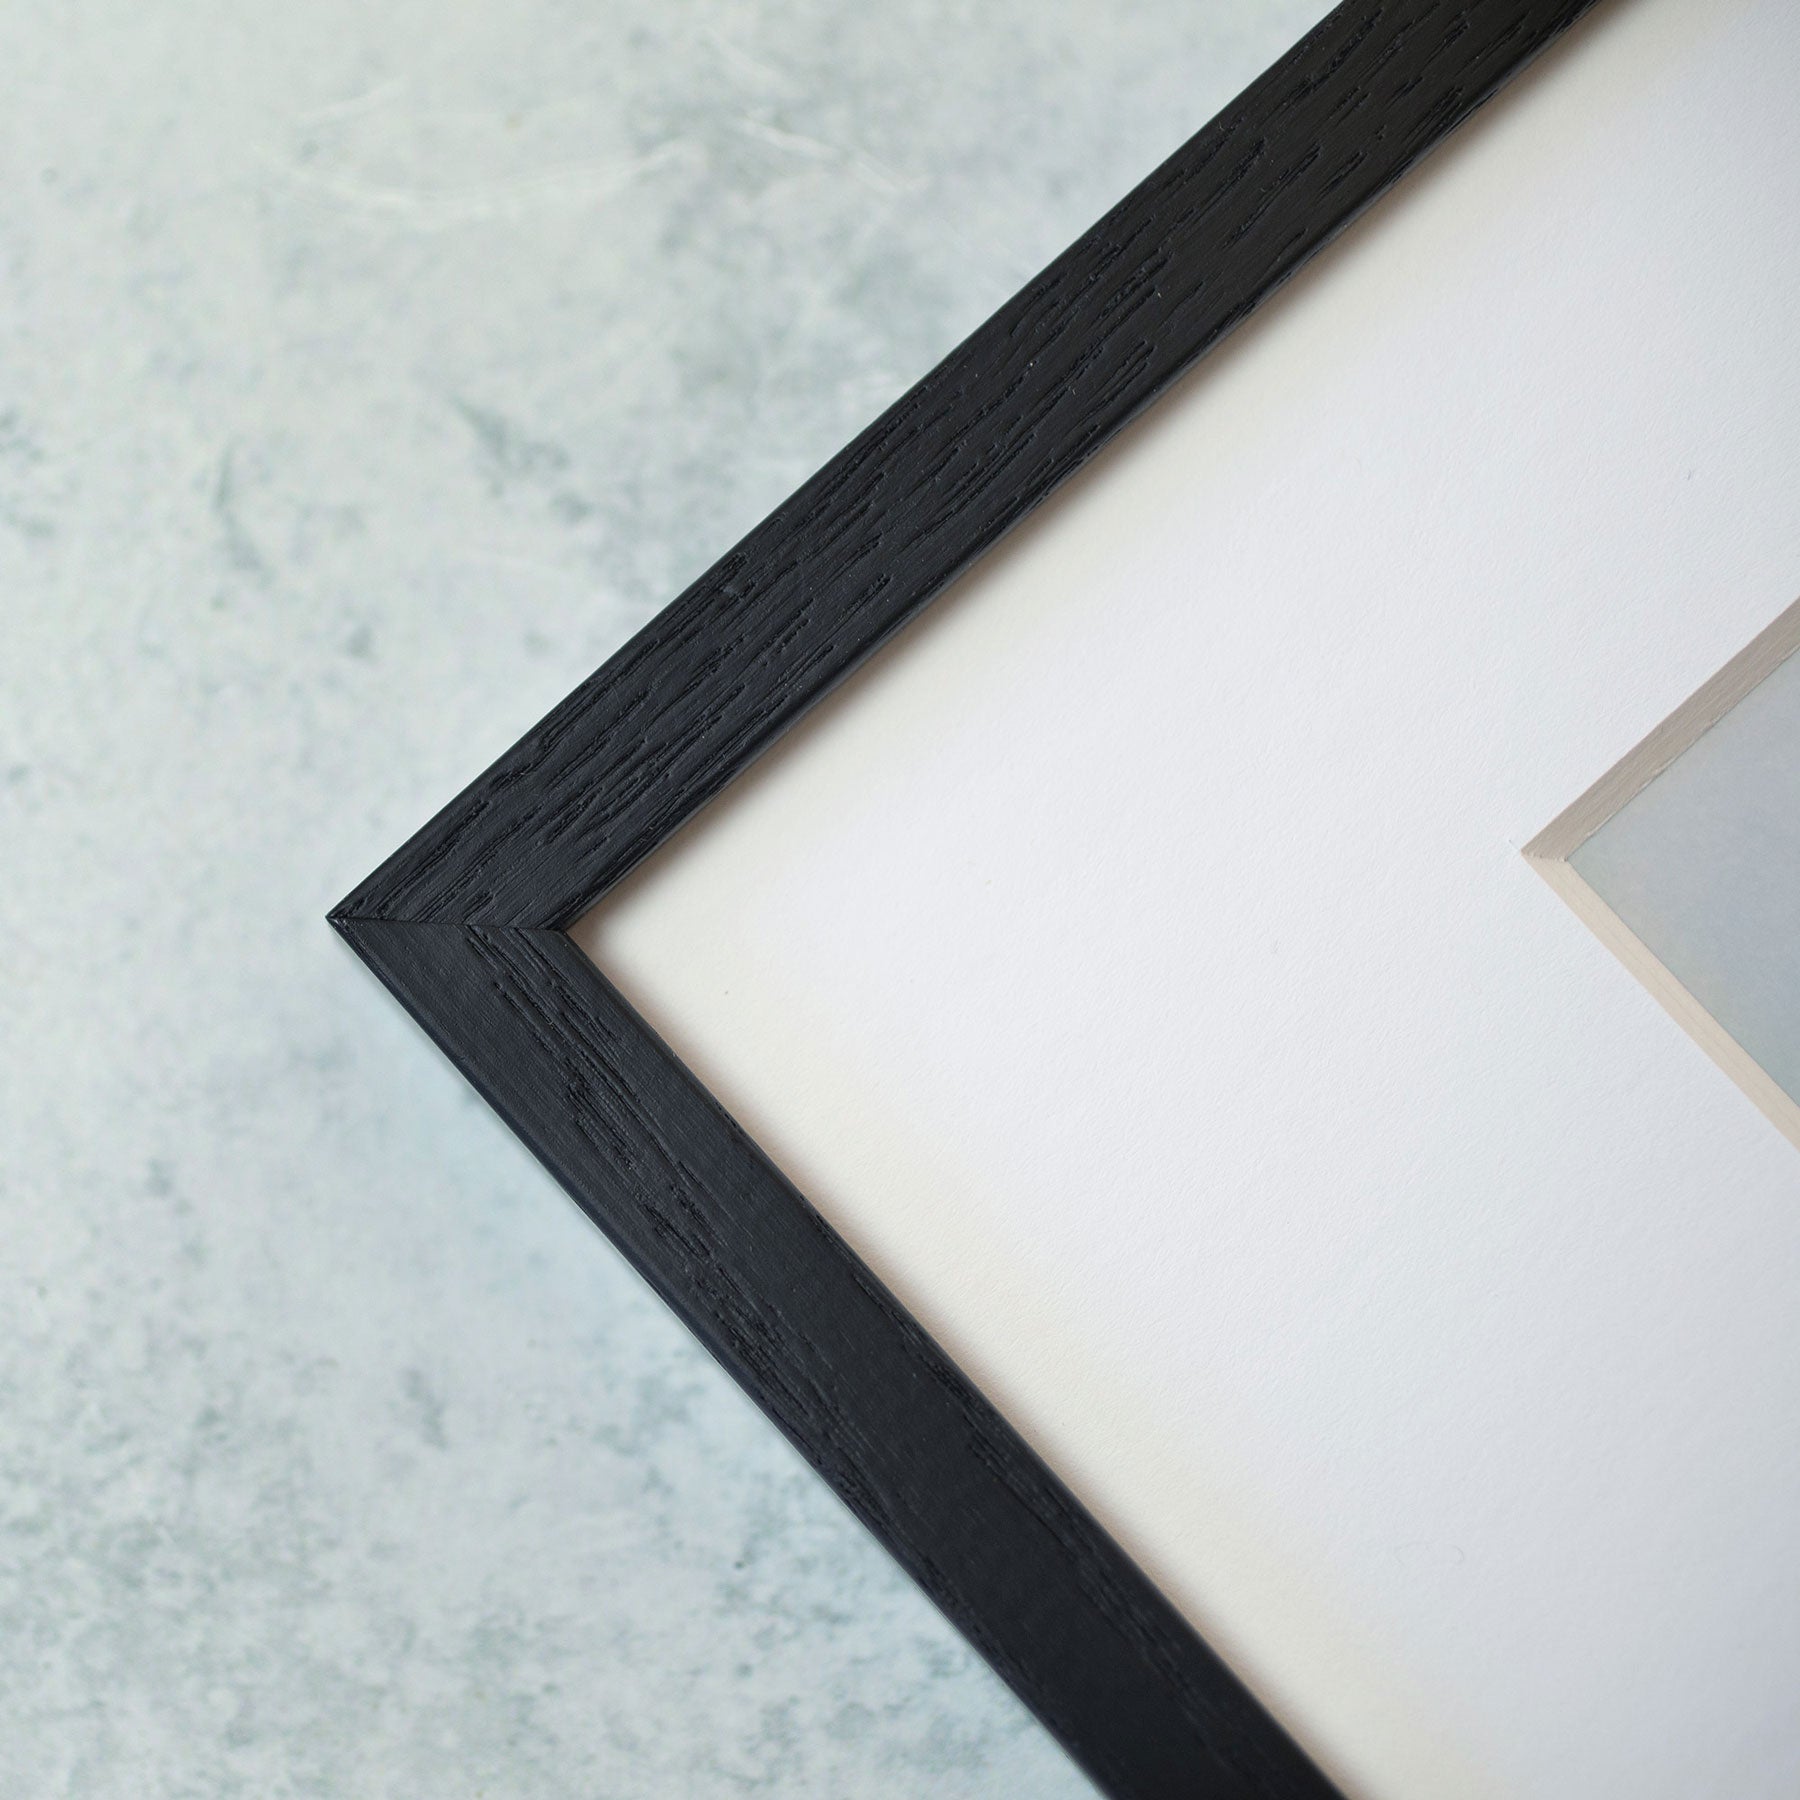 Close-up of a corner of a black textured picture frame with a white mat and a portion of the Neutral Grey Floral Print, &#39;Dandelion King&#39; printed on archival photographic paper visible on a light gray background by Offley Green.